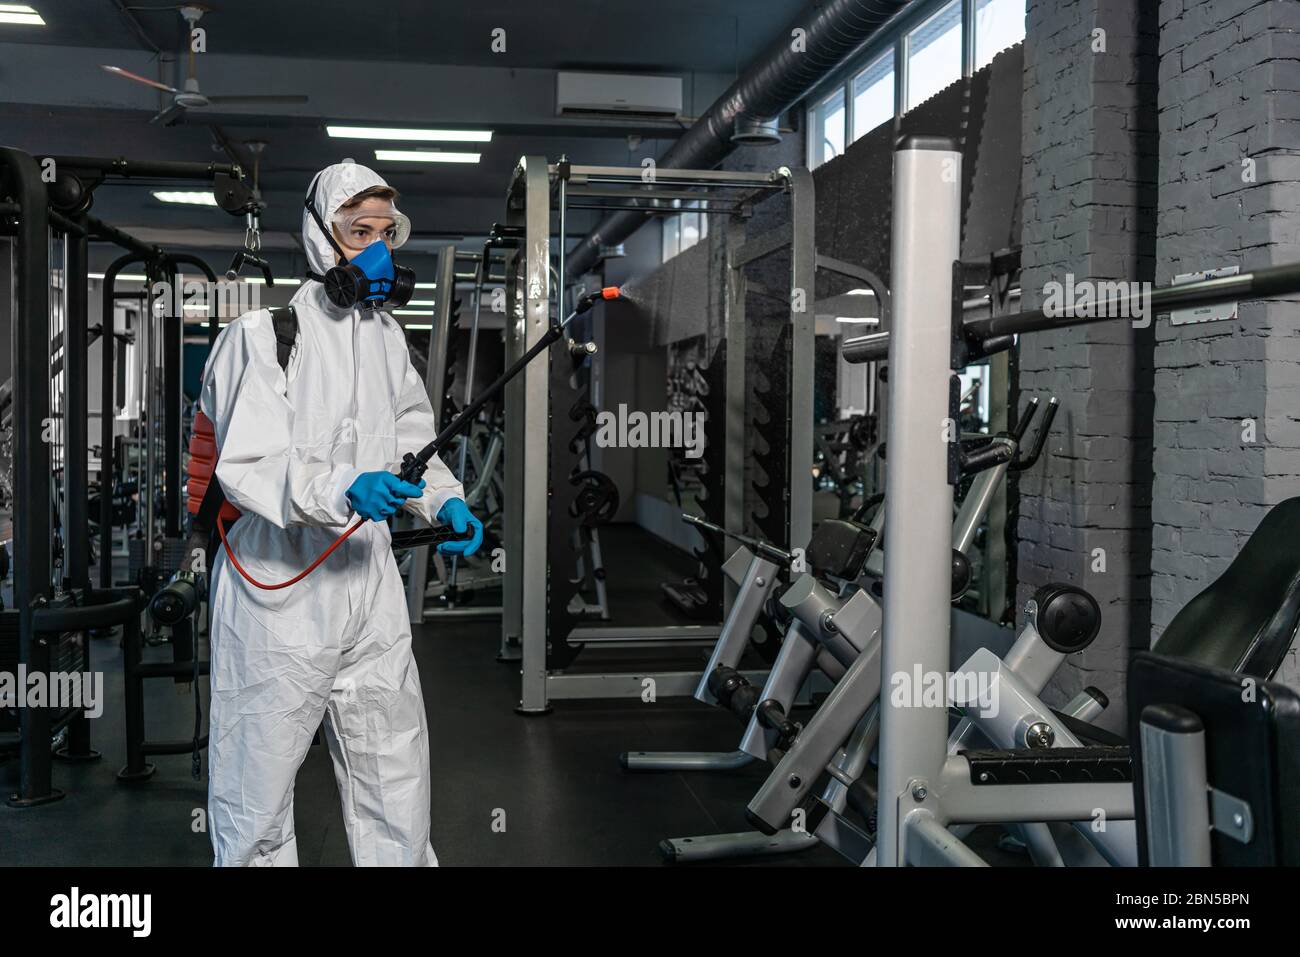 Cleaning and Disinfection in crowded places amid the coronavirus epidemic Gym cleaning and disinfection Infection prevention and control of epidemic. Stock Photo